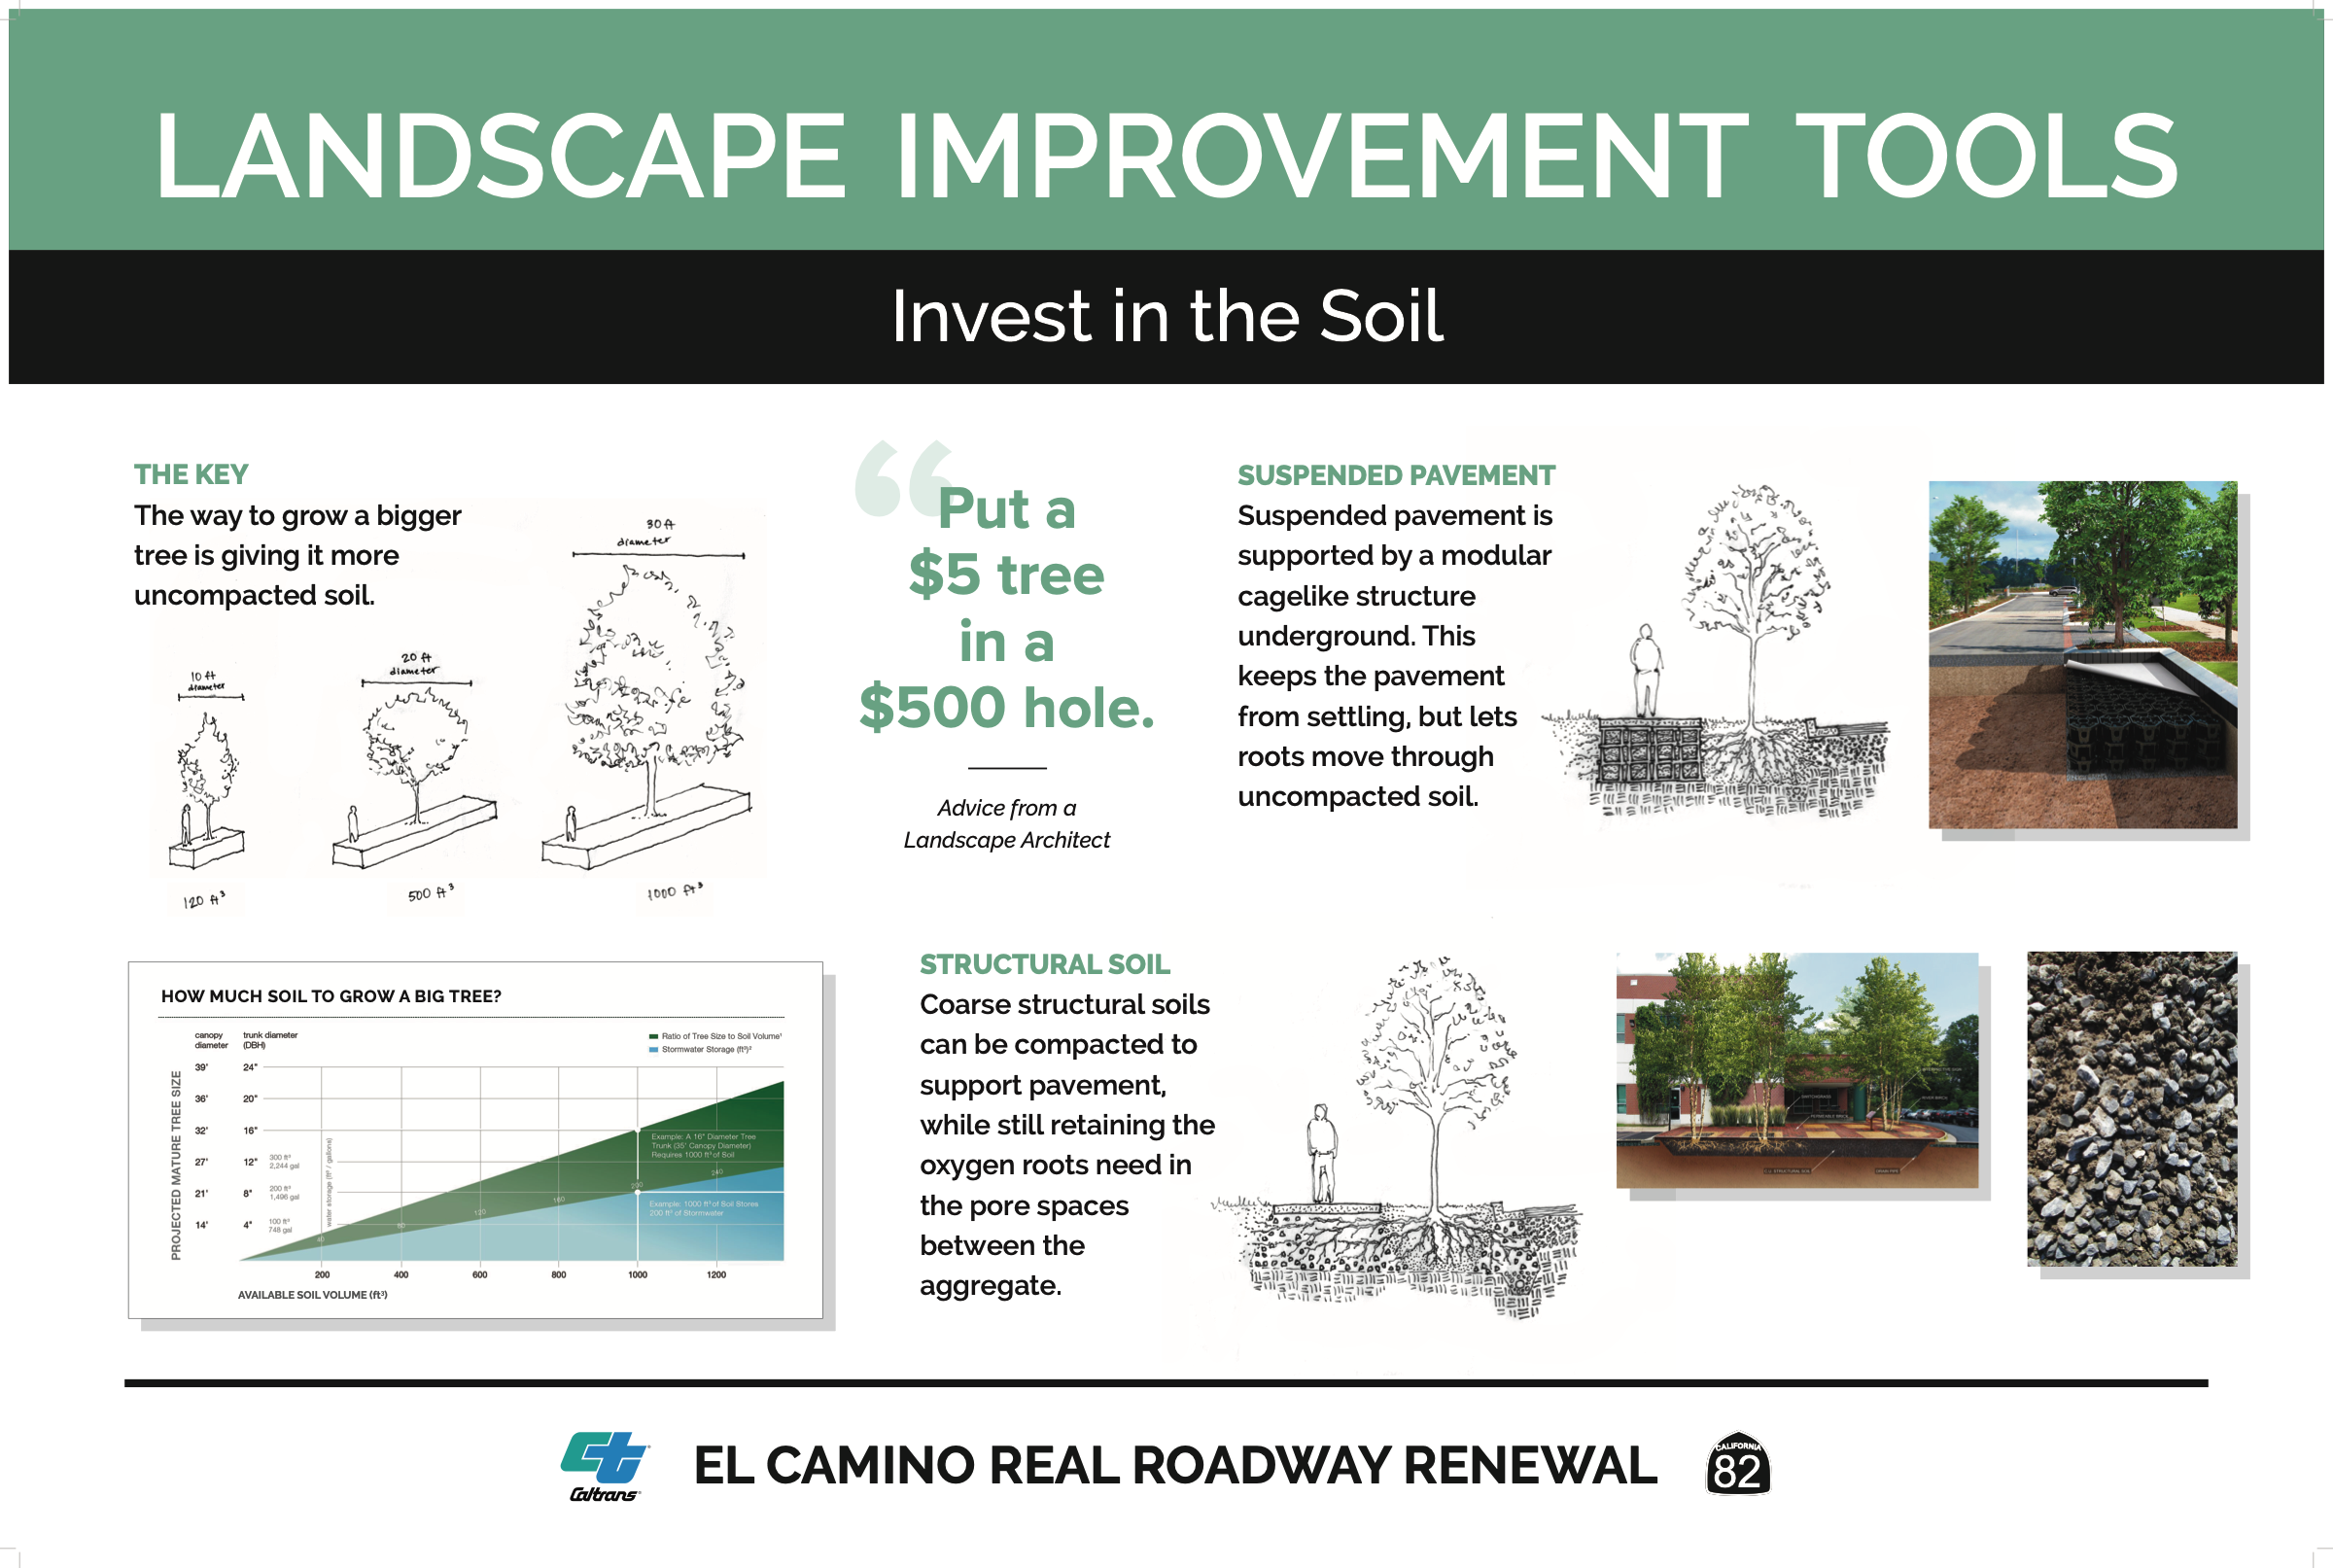 landscape improvement tools - invest in the soil